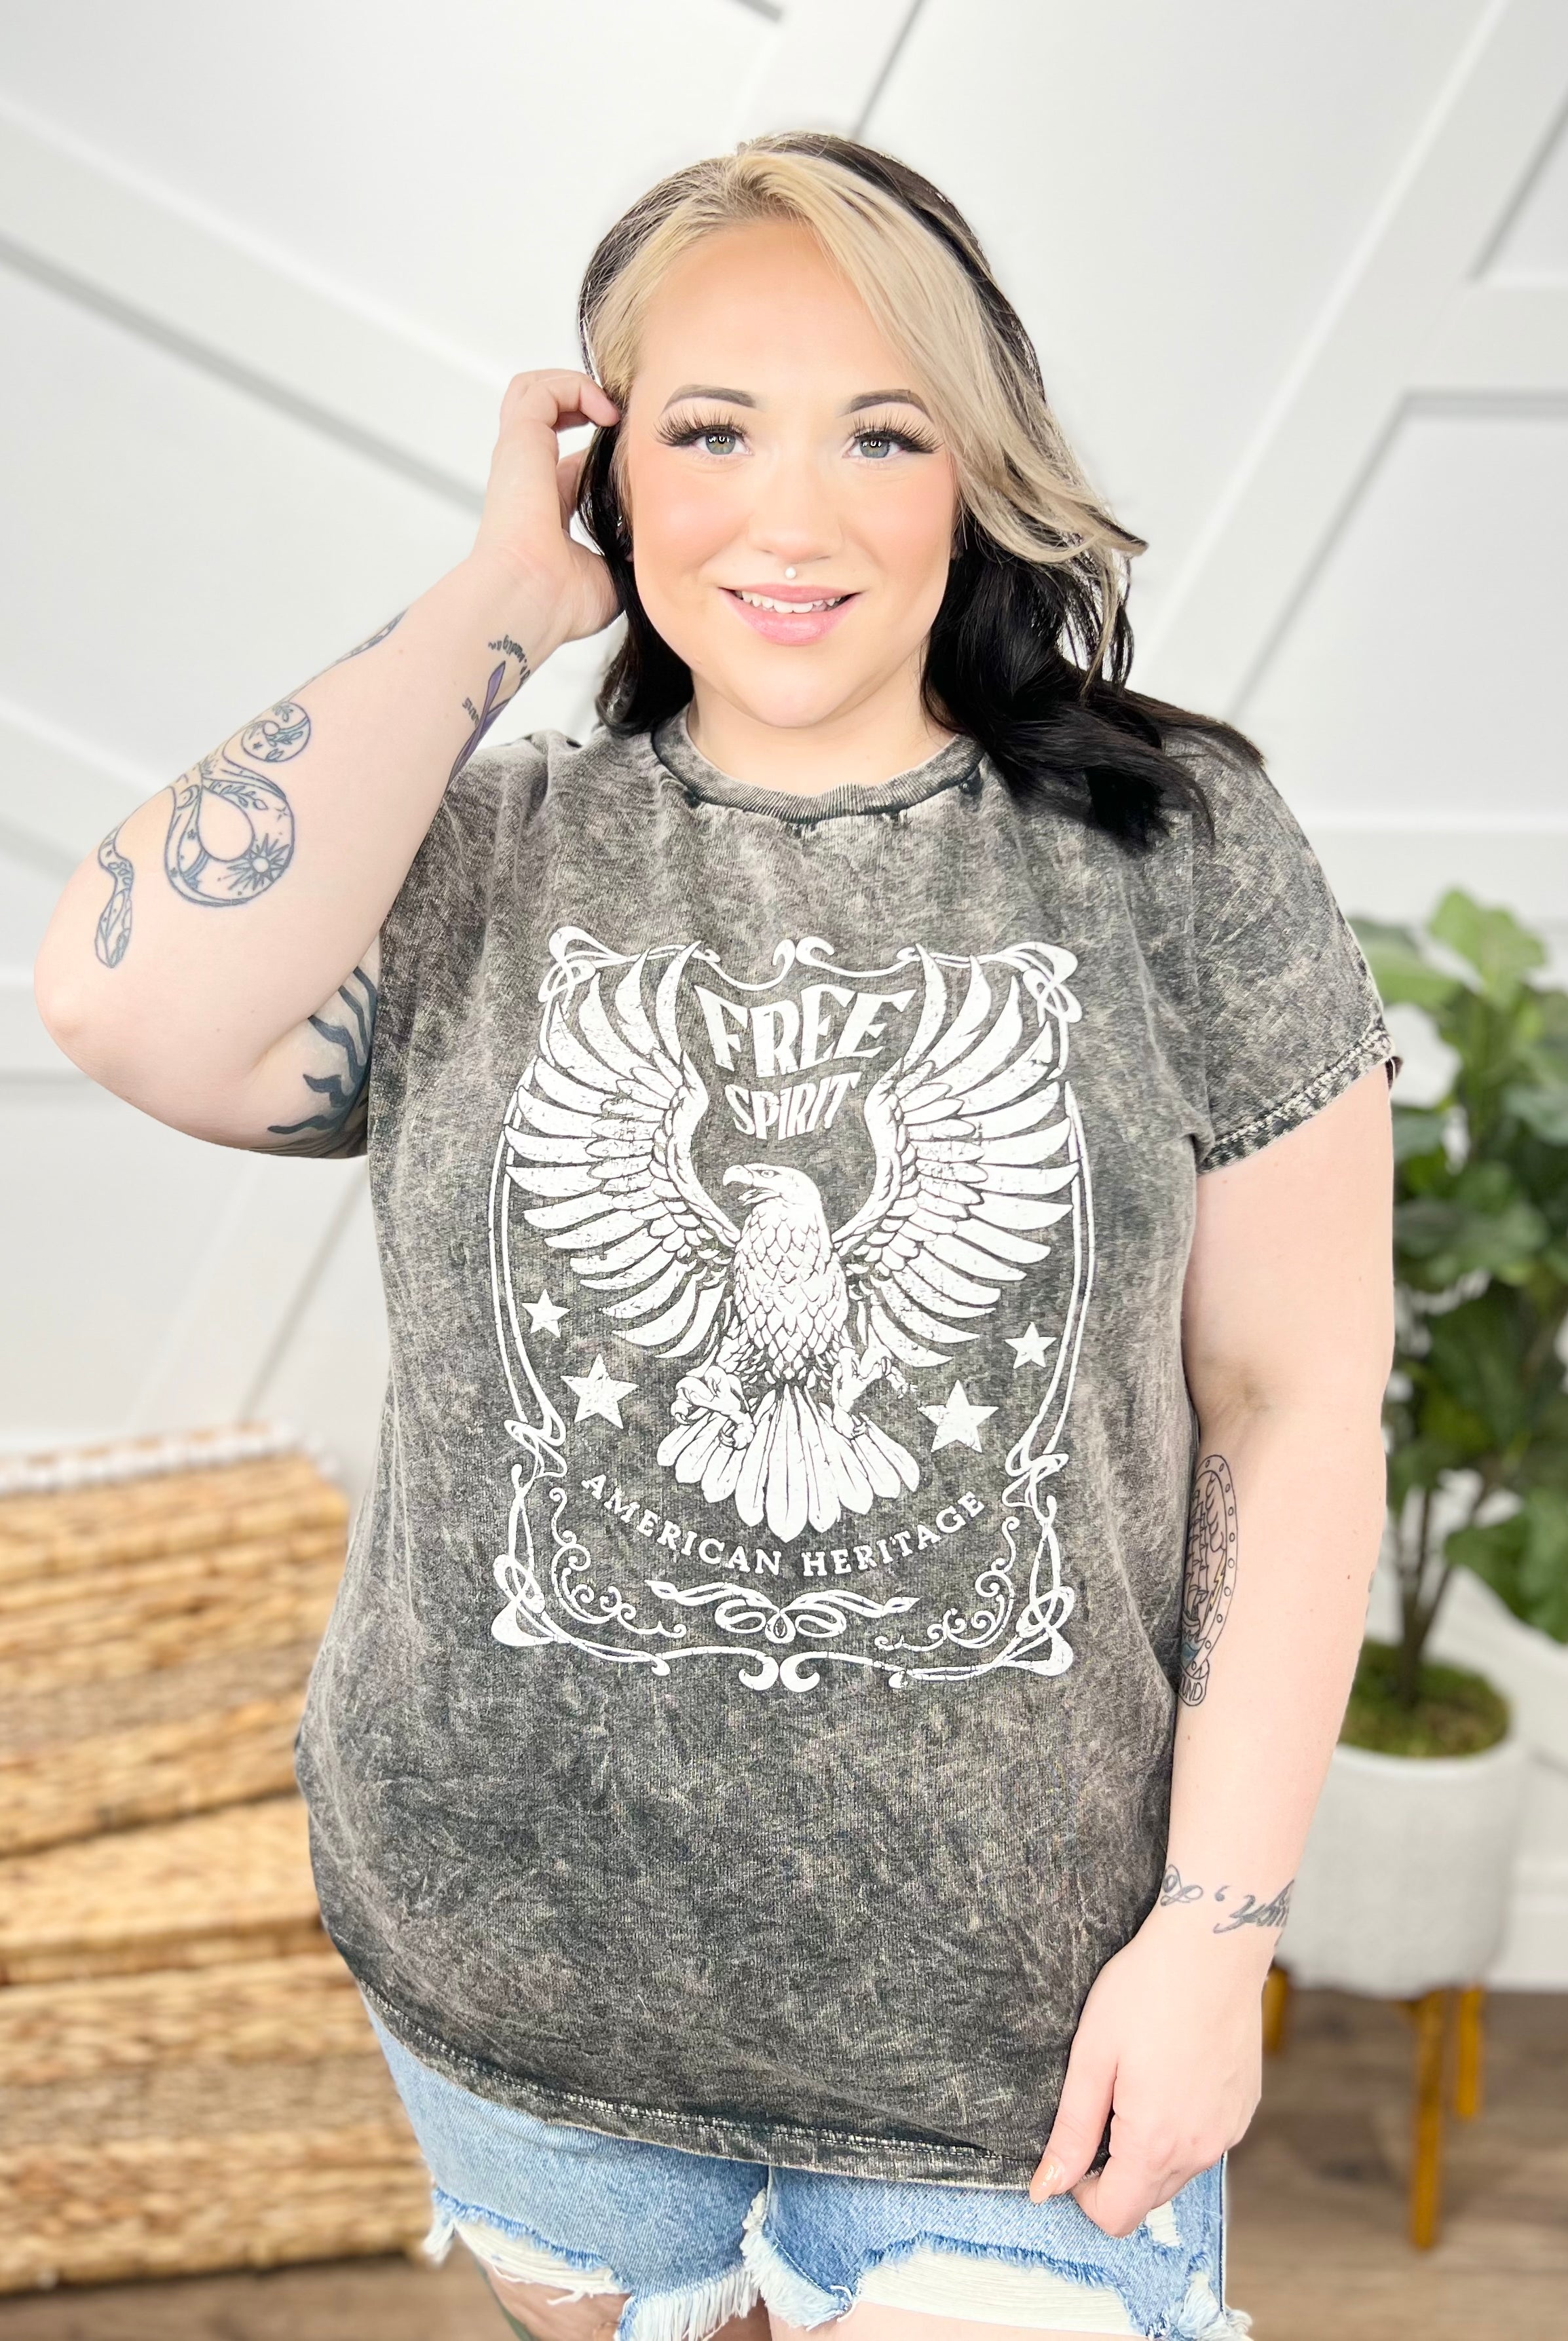 Free Spirit Graphic Tee-110 Short Sleeve Top-J. Her-Heathered Boho Boutique, Women's Fashion and Accessories in Palmetto, FL